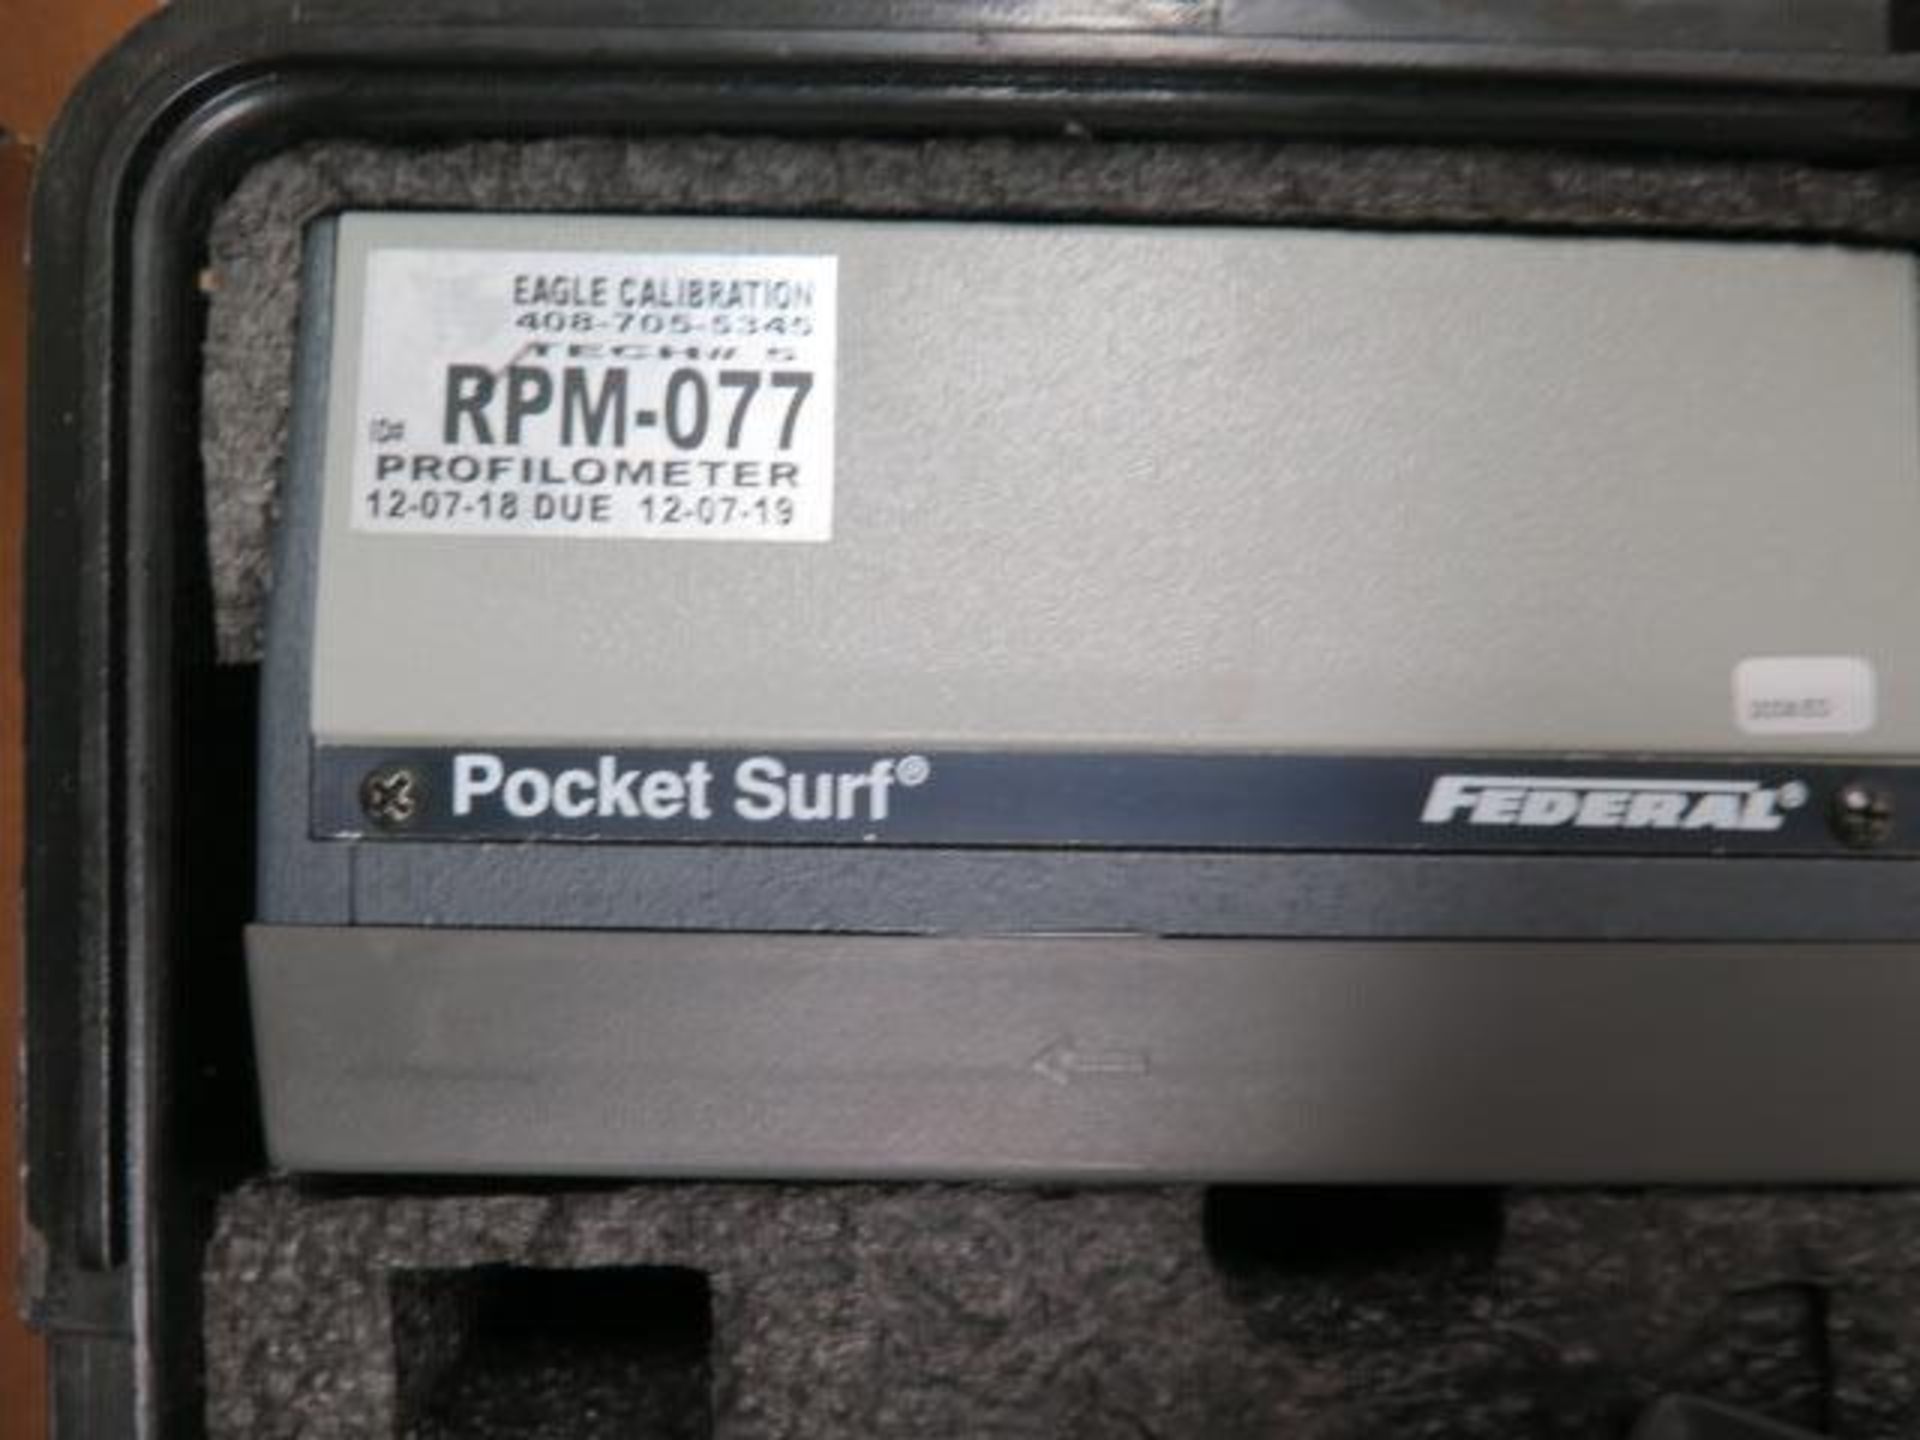 Federal “Pocket Surf” Digital Surface Roughness Gage (SOLD AS-IS - NO WARRANTY) - Image 5 of 5